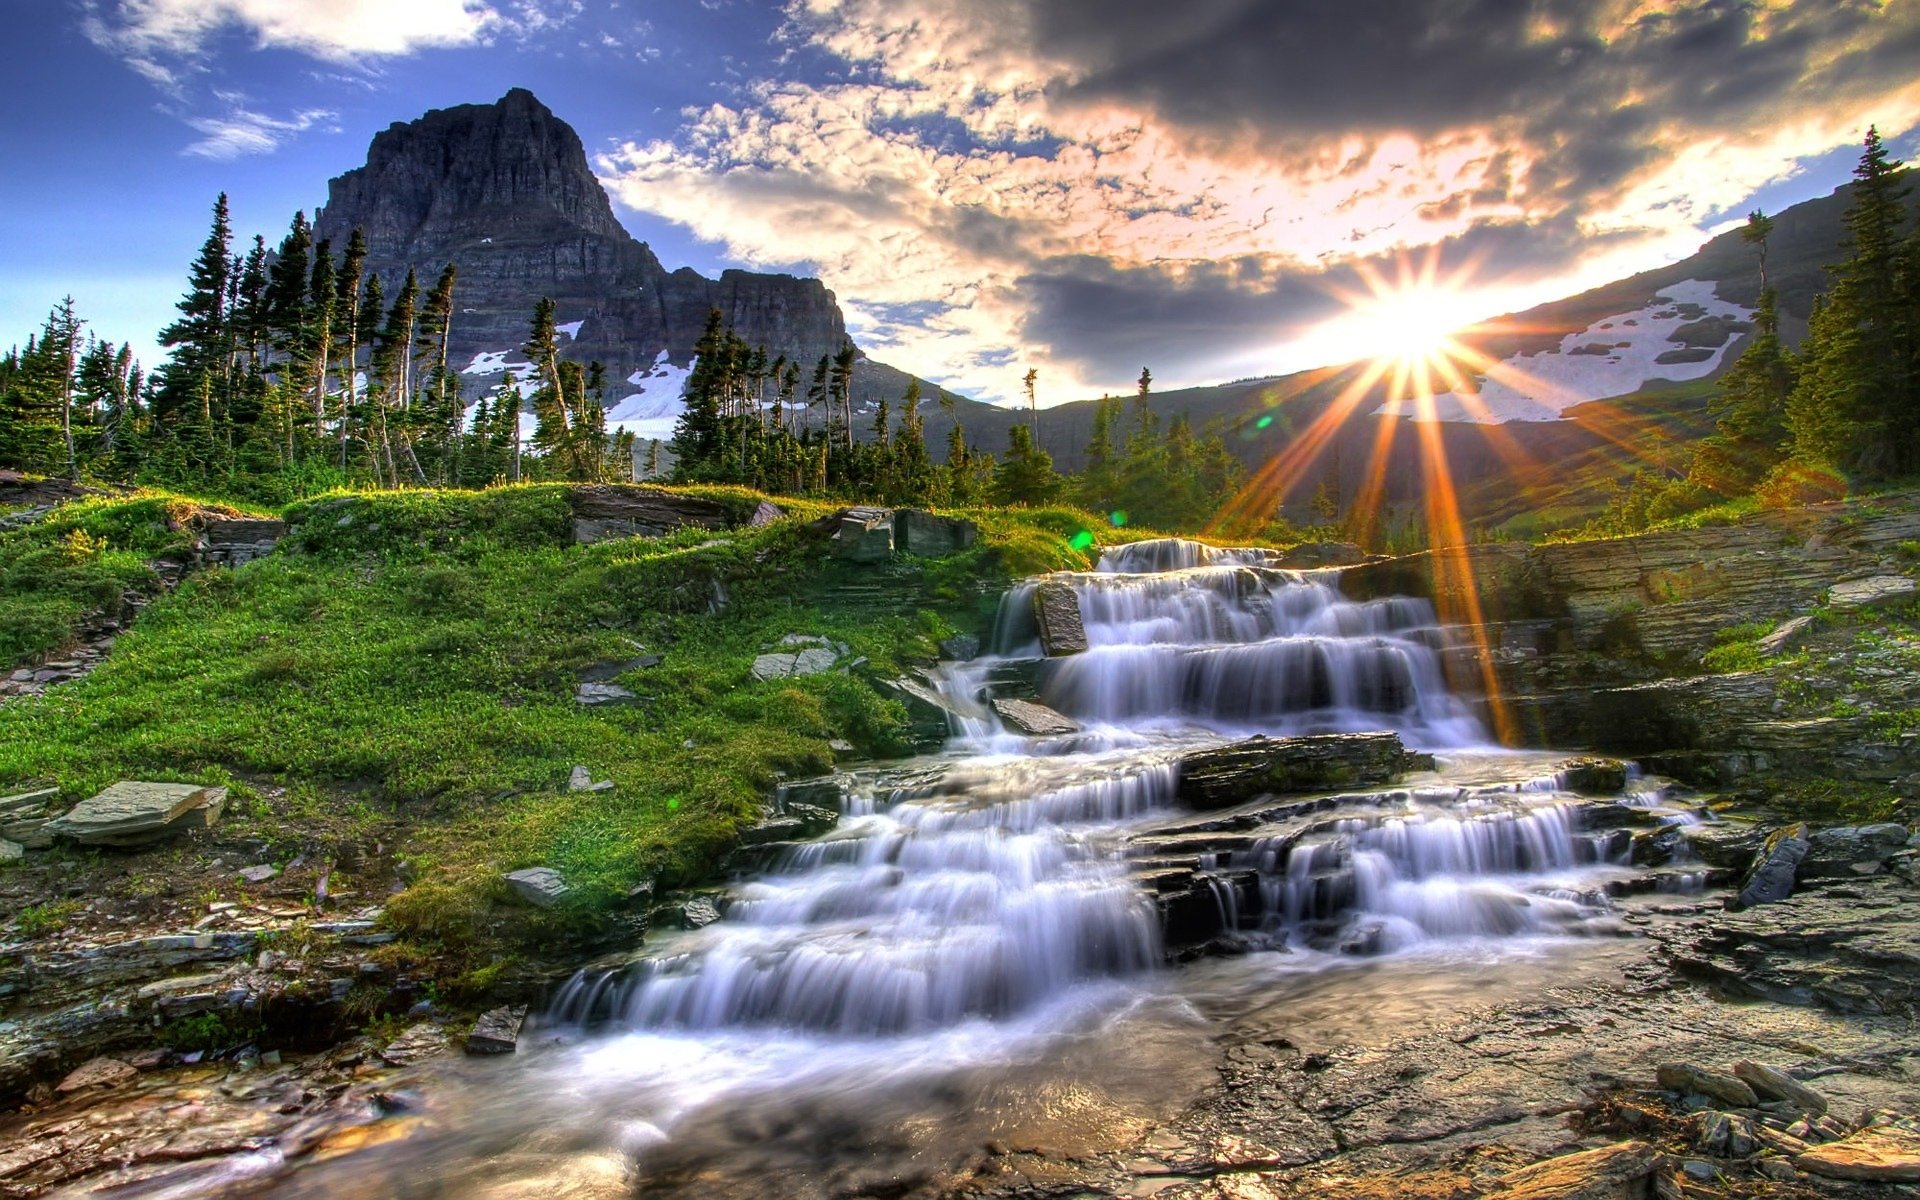 background images of waterfalls #9